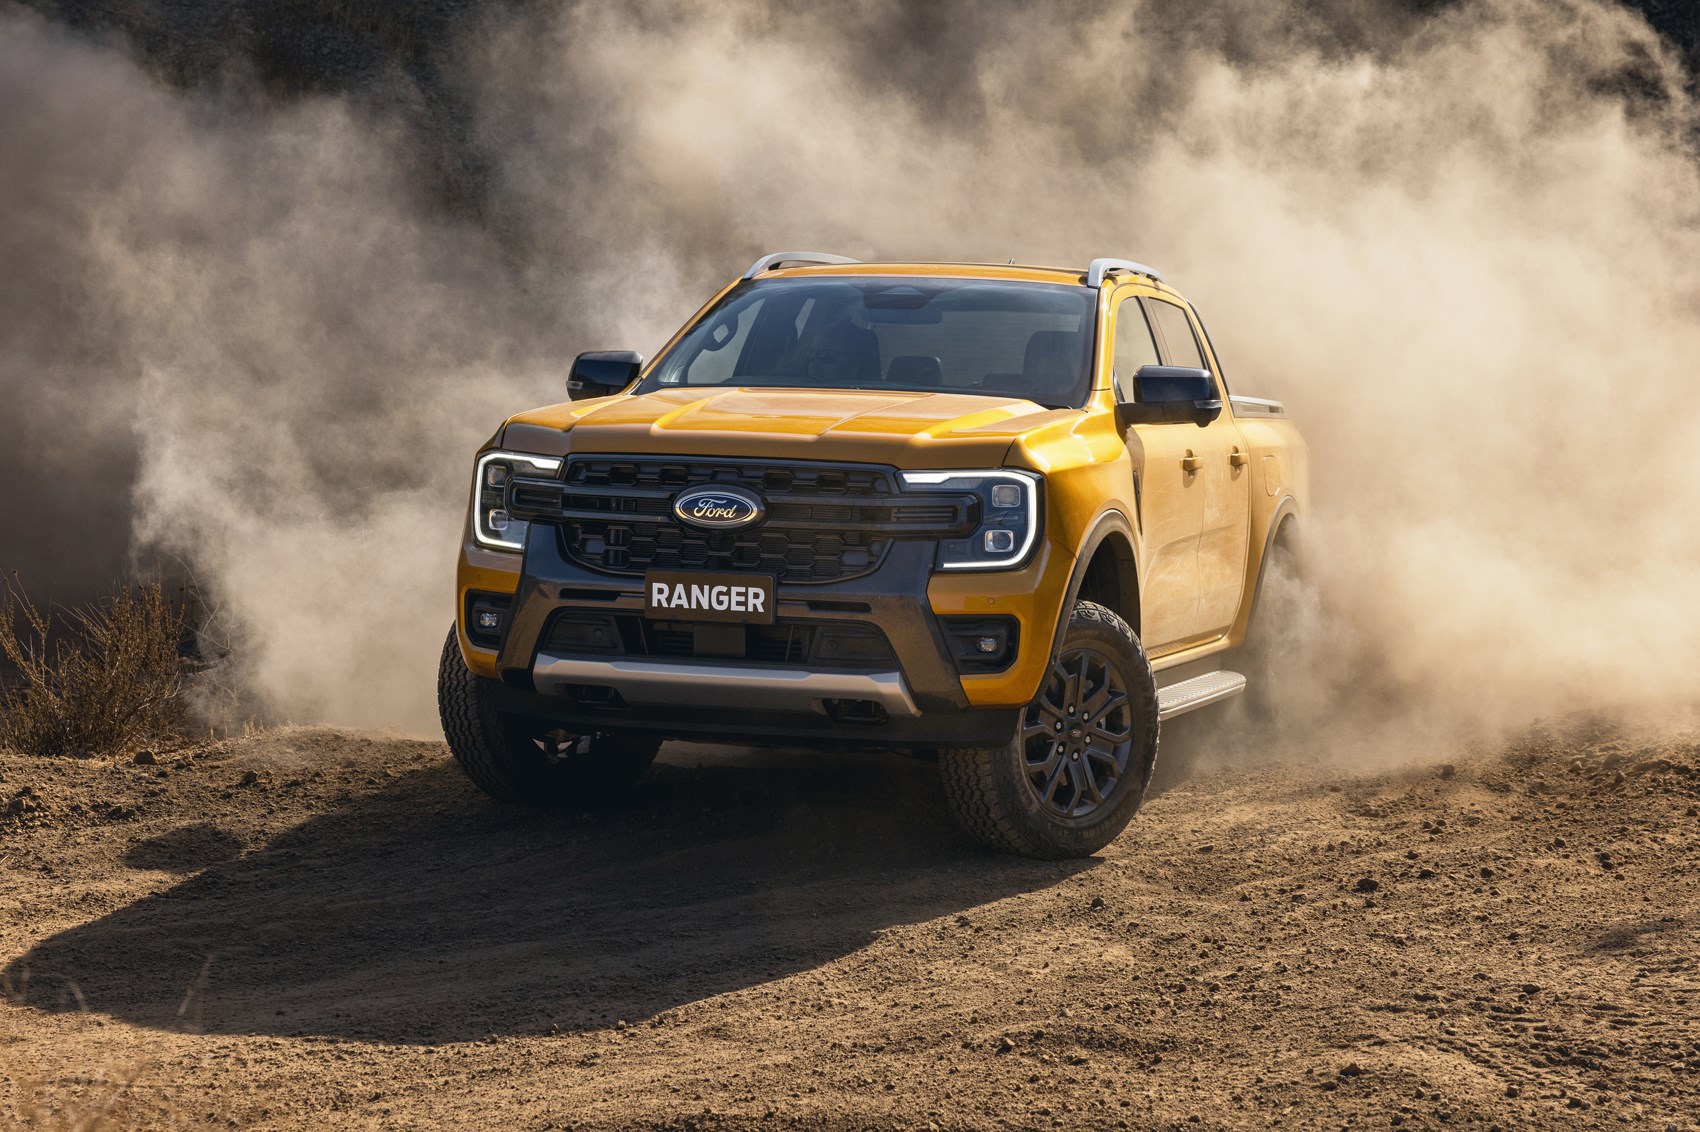 Ford Ranger Among Top 10 Slowest Selling New Cars